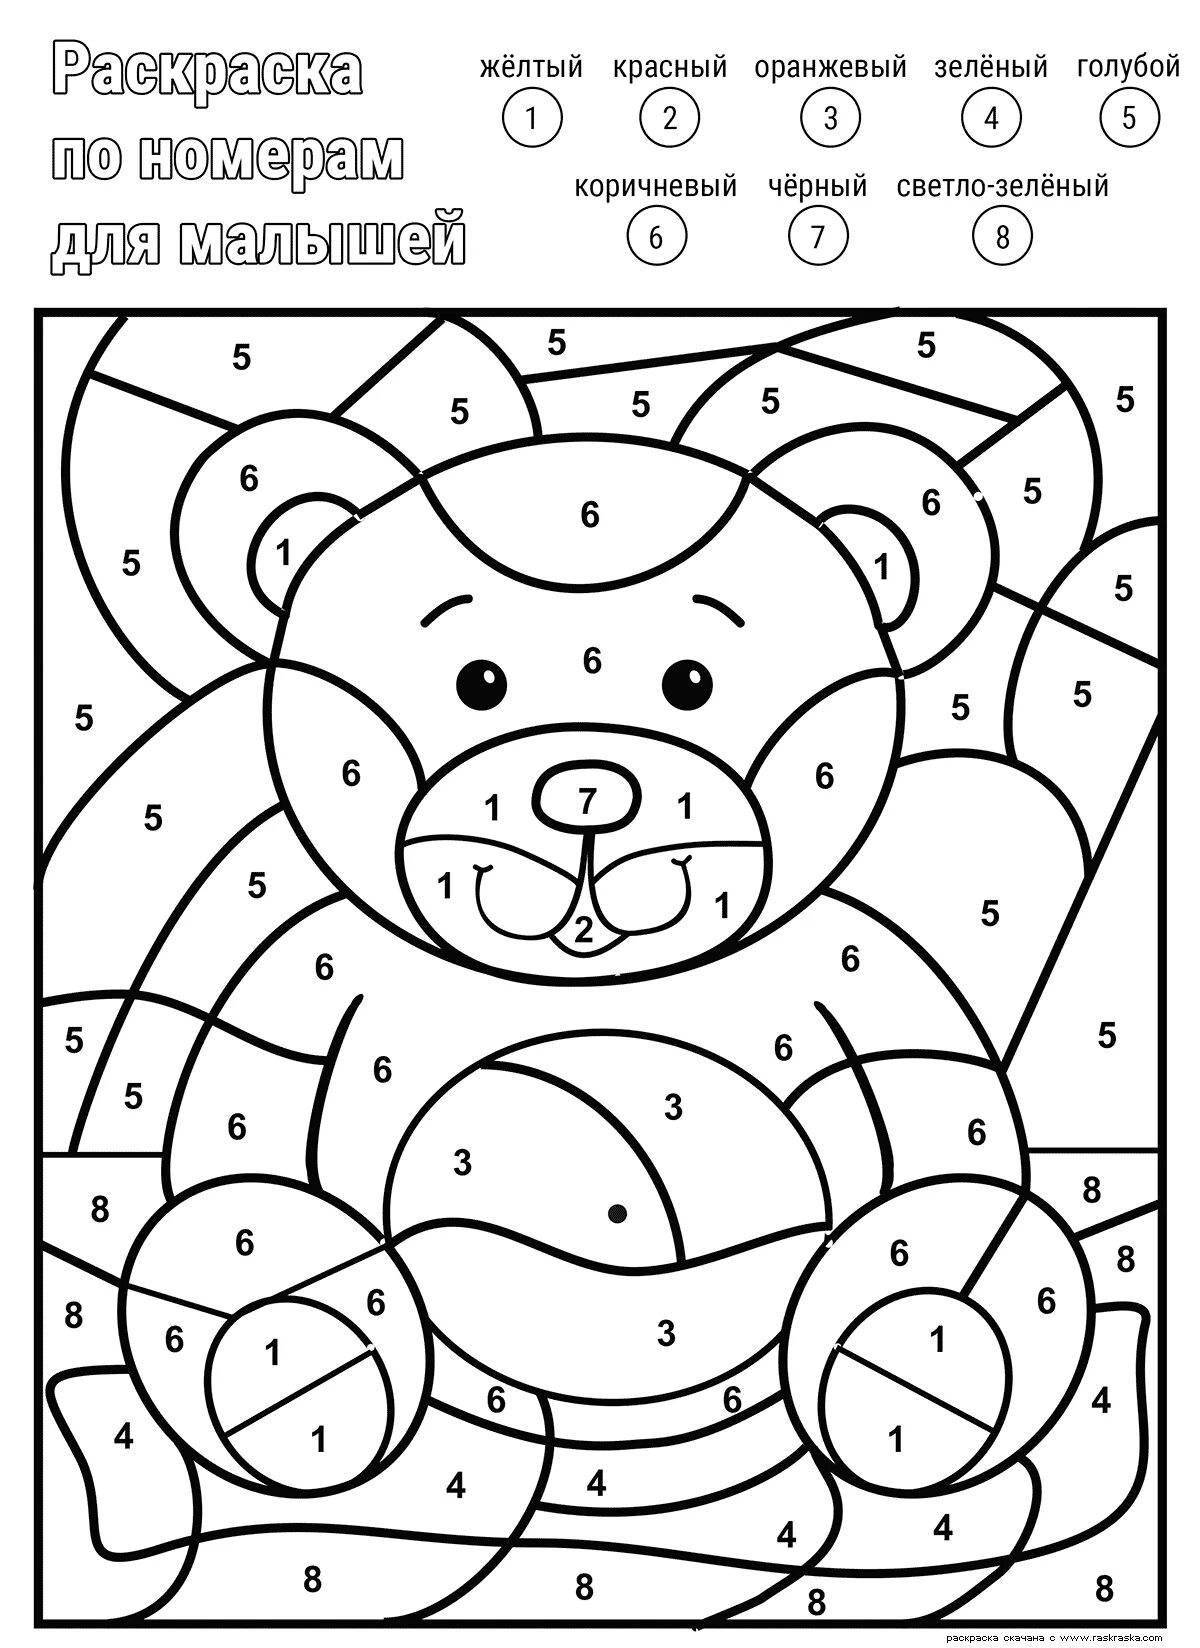 Invigorating coloring game by numbers in contact